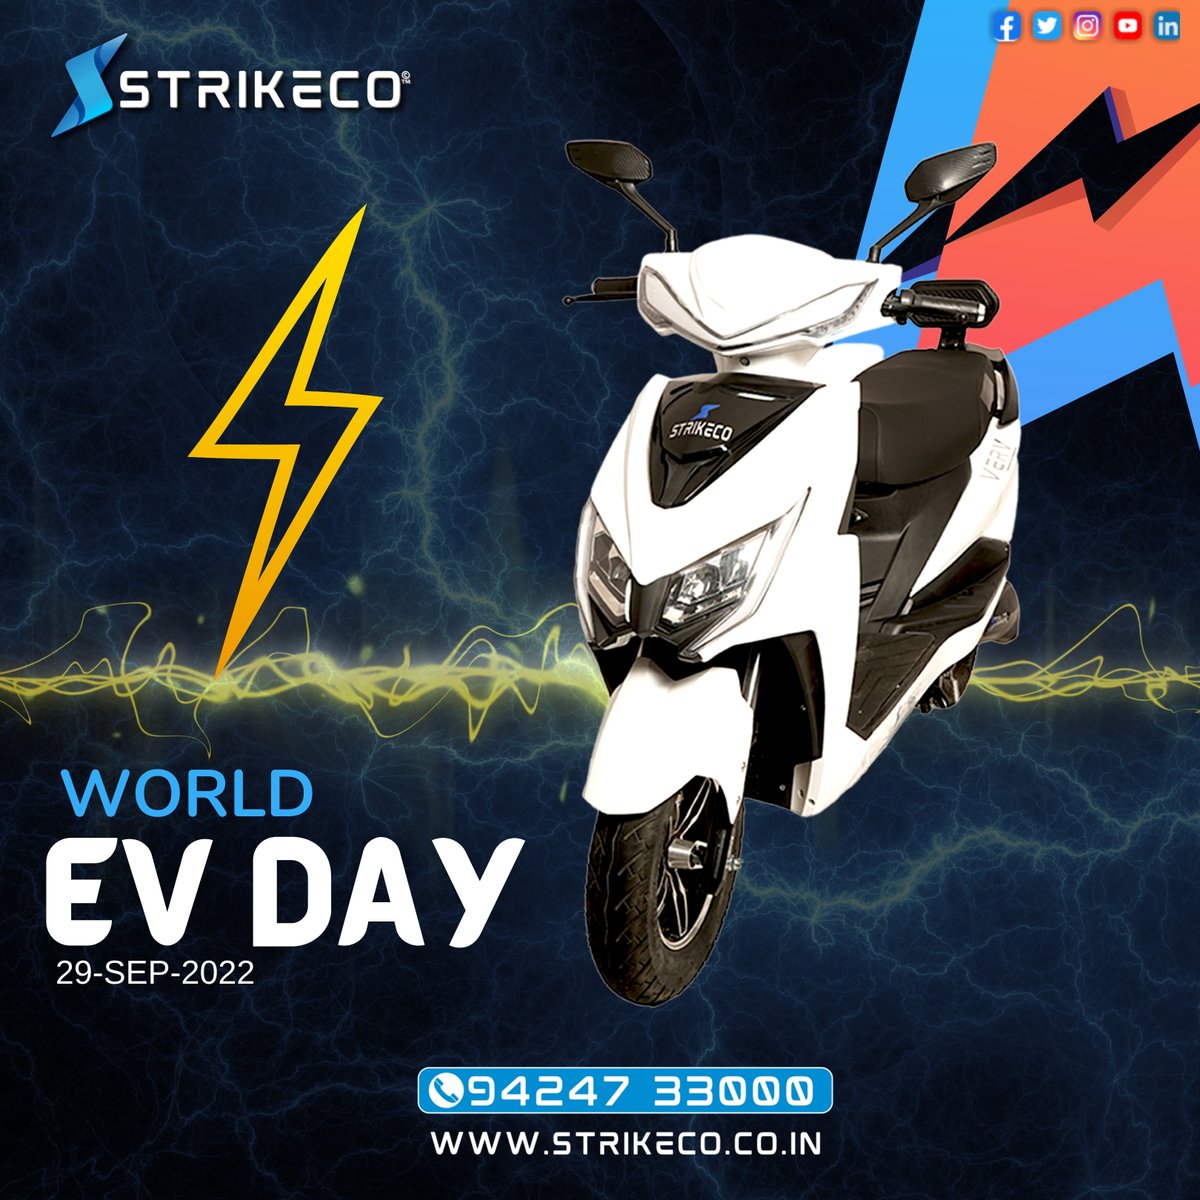 This world EV day celebrate with #STRIKECO ⚡⚡🌍
#chooseelectric #RechargeAndGo #vroom #smartmobility #electricvehicles #electricvehiclesindia #madeinindia #PollutionFreeIndia #MobilityScooter #ecofriendlyliving #electricvehivleindia #electricvehiclearethefuture